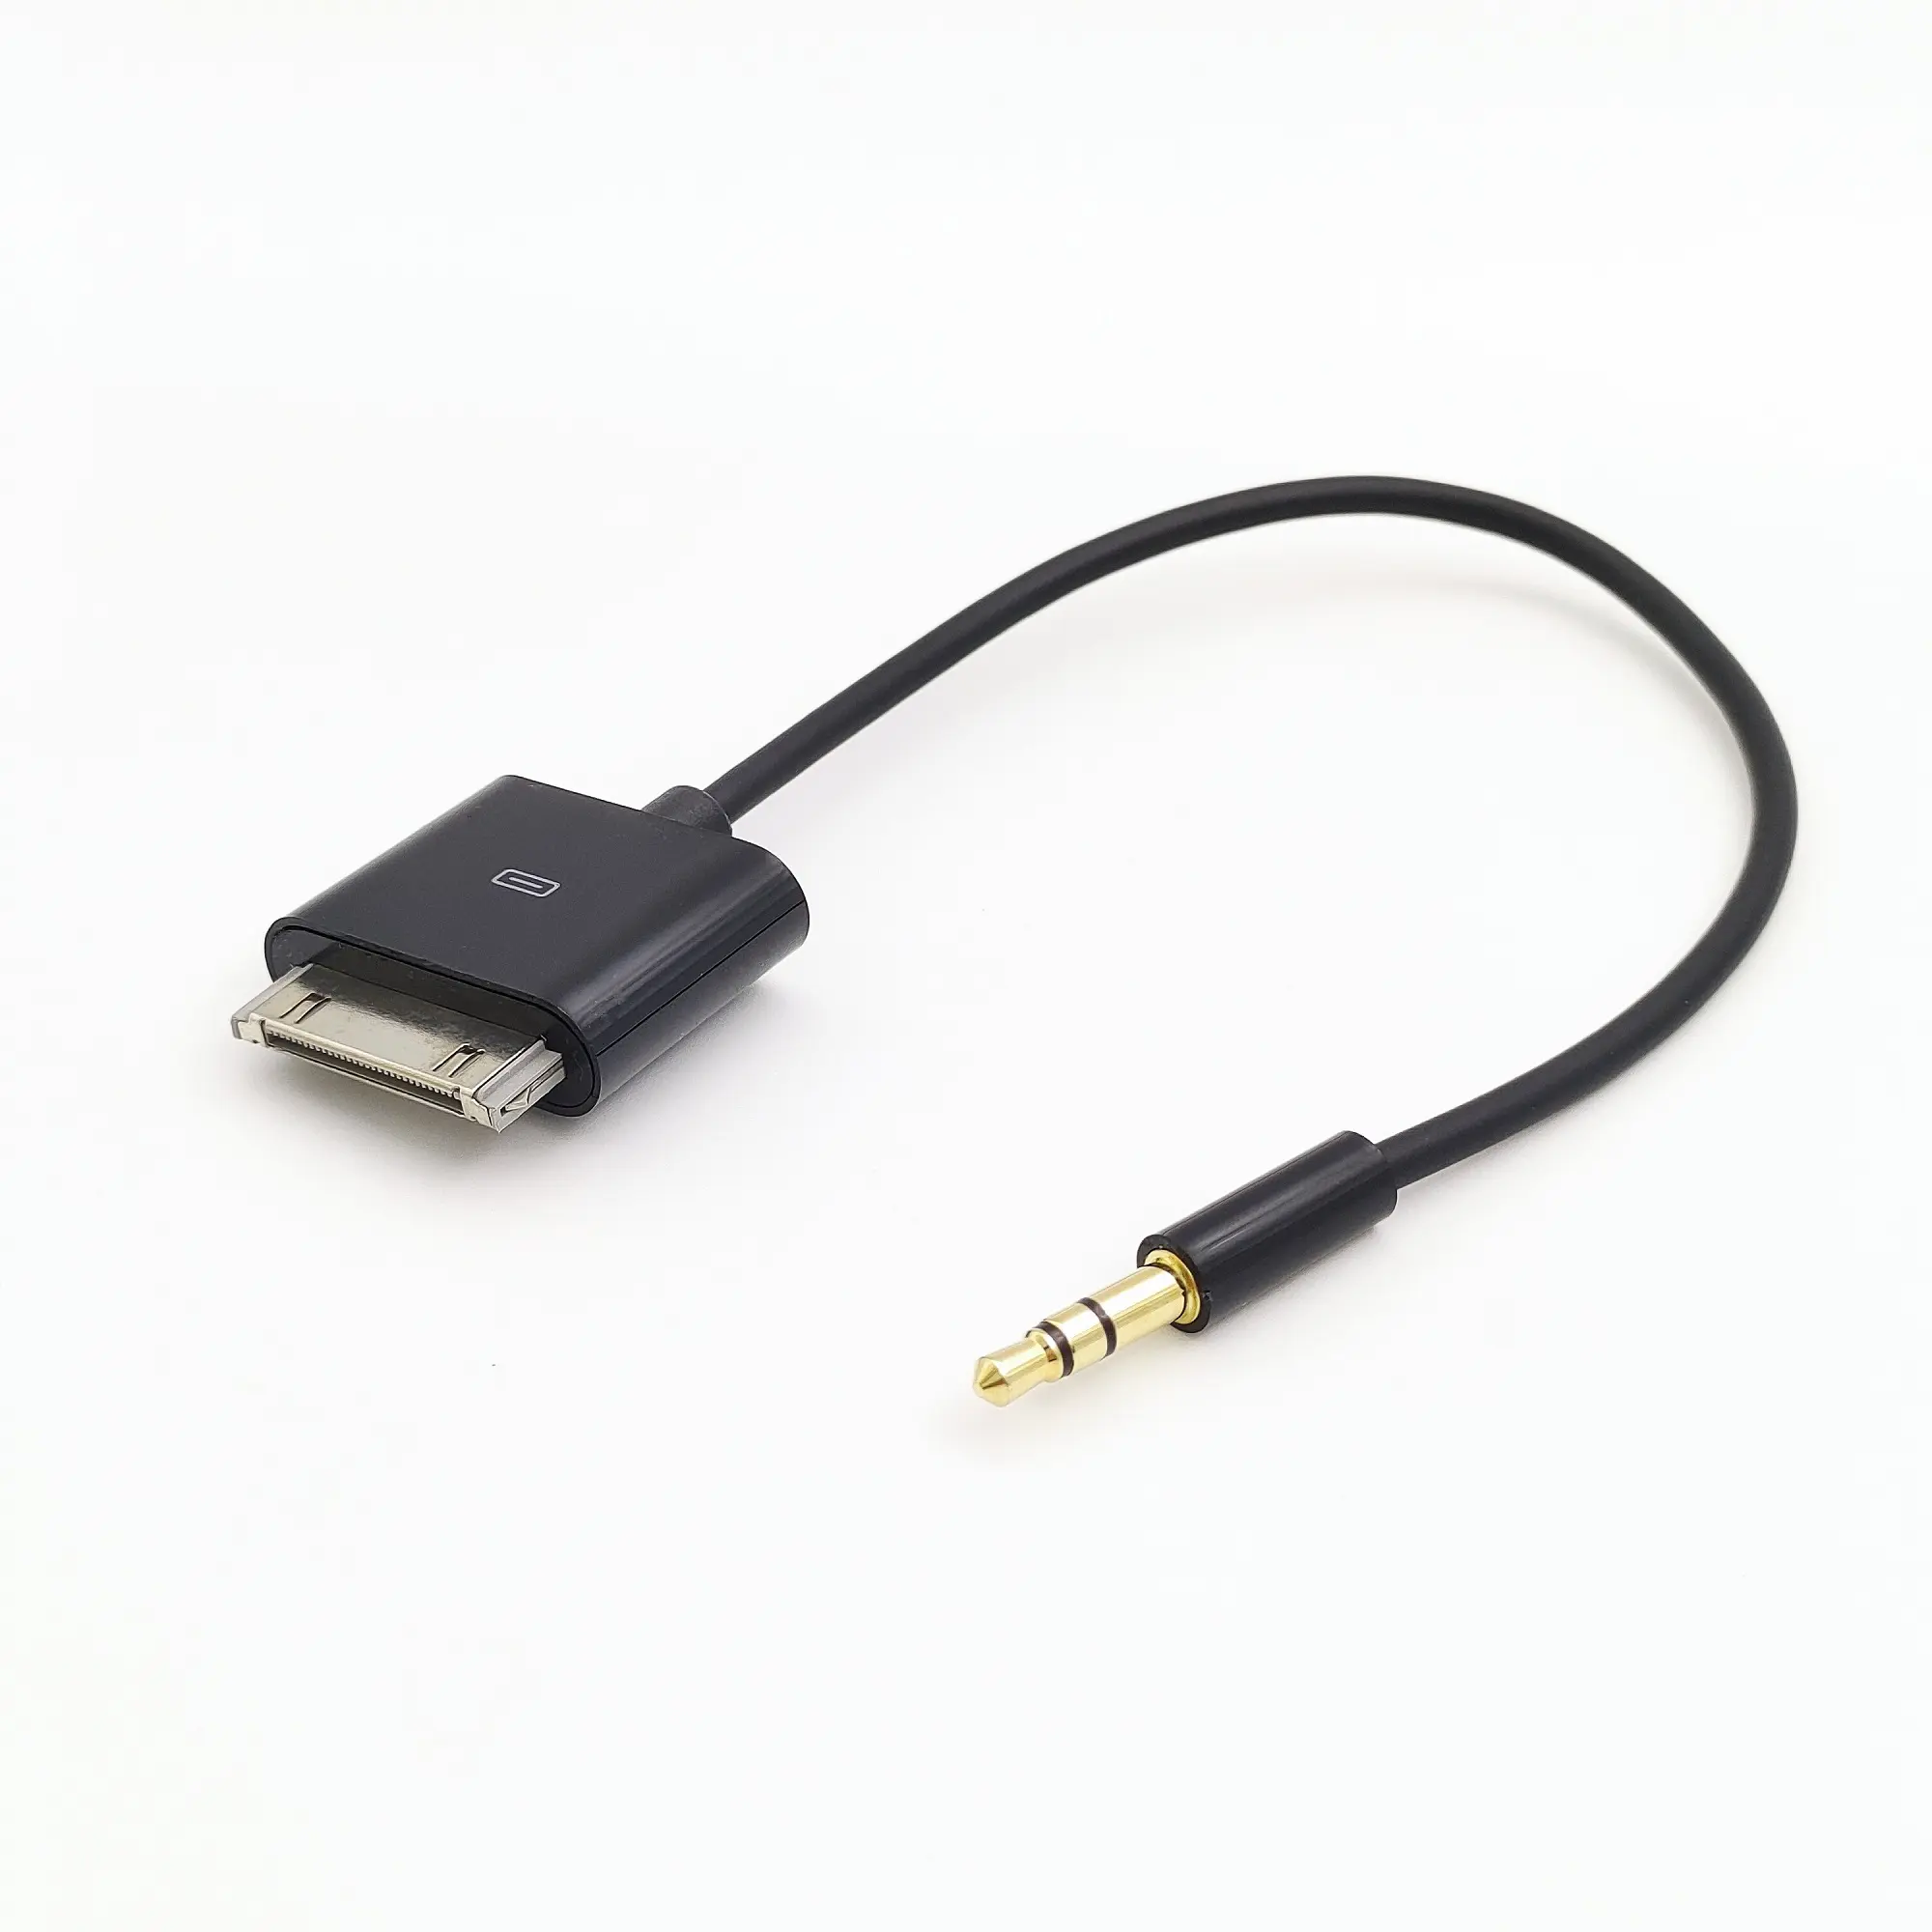 20cm For iPod 30pin Dock Connector to 3.5mm Stereo Input Adapter Plug aux cable for iPhone 3/4 iPad 1/2/3